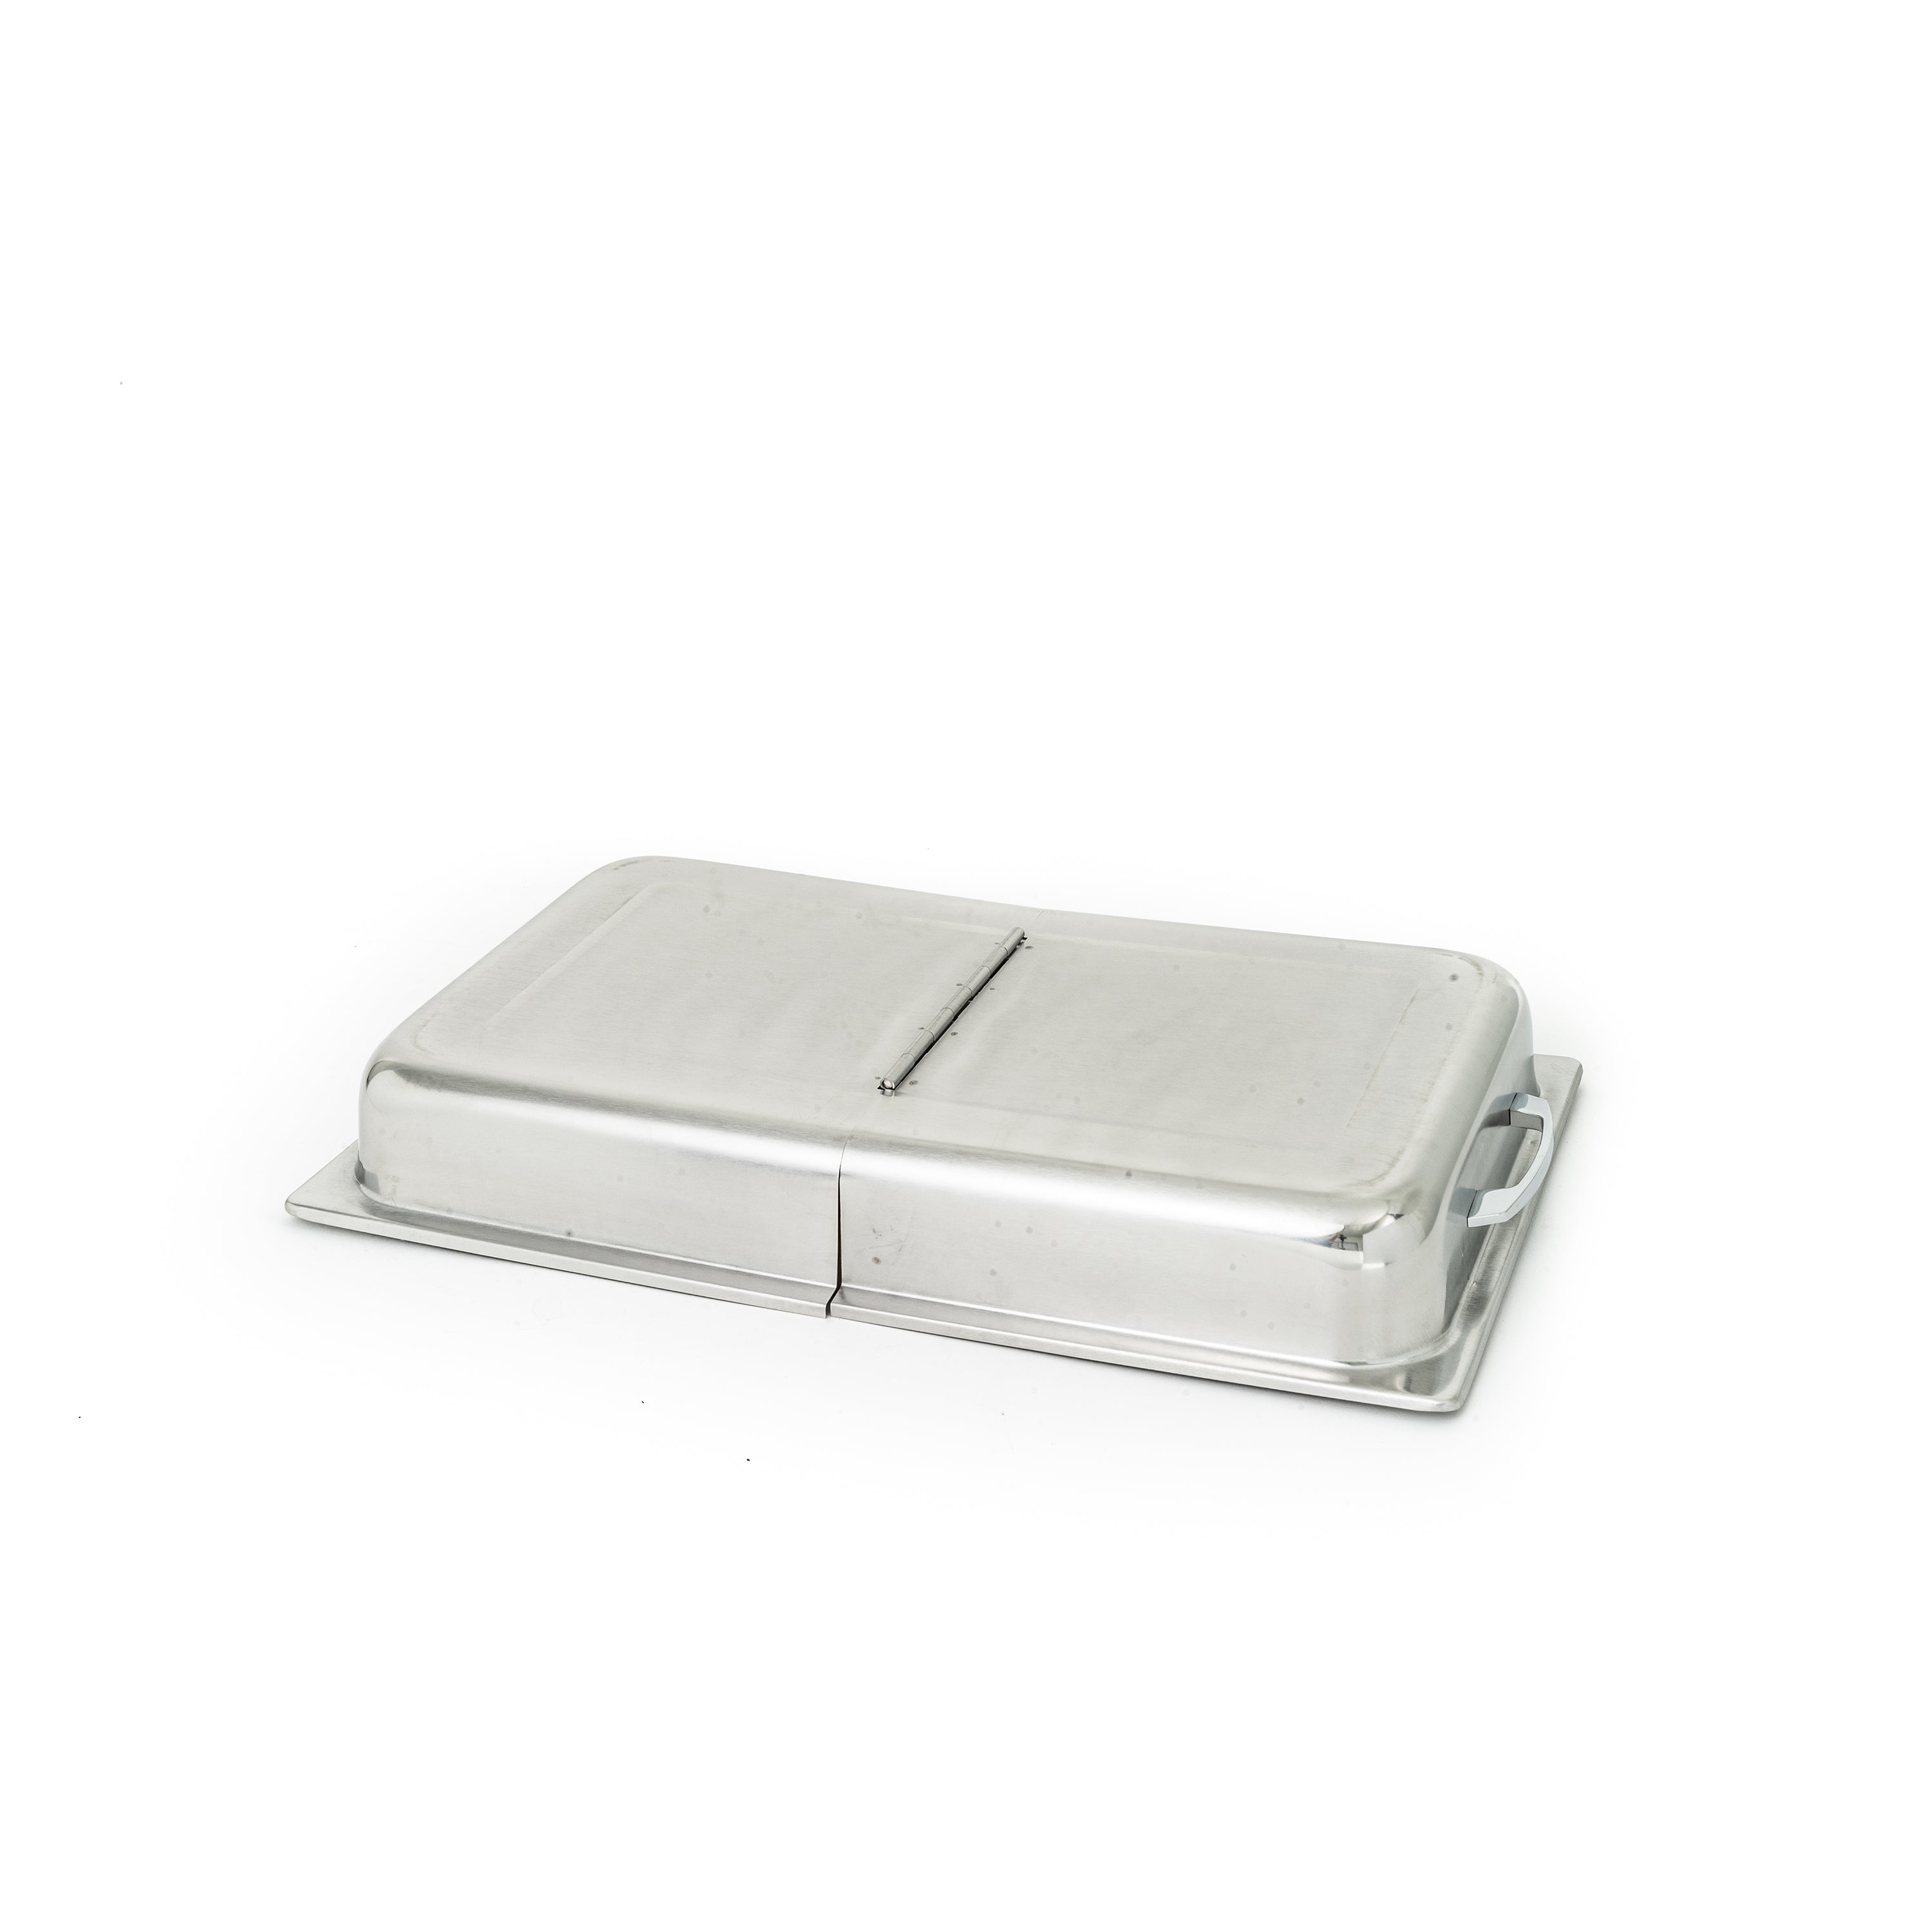 Adcraft DCH-200F Steam Table Pan Cover, Stainless Steel